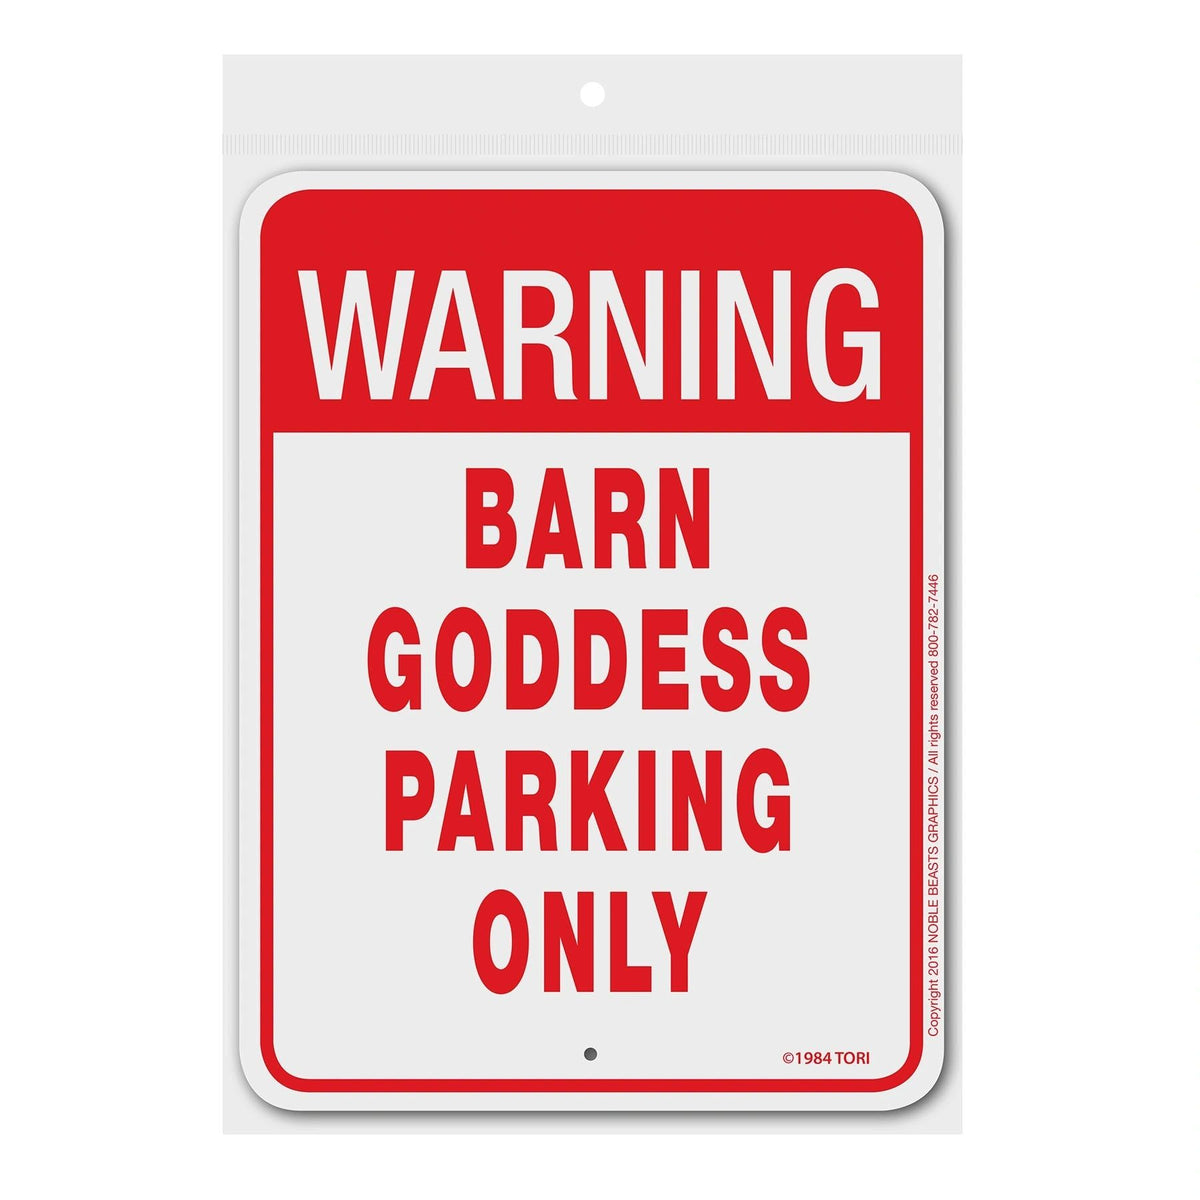 Warning Barn Goddess Parking Only Sign Aluminum 9 in X 12 in #3245401